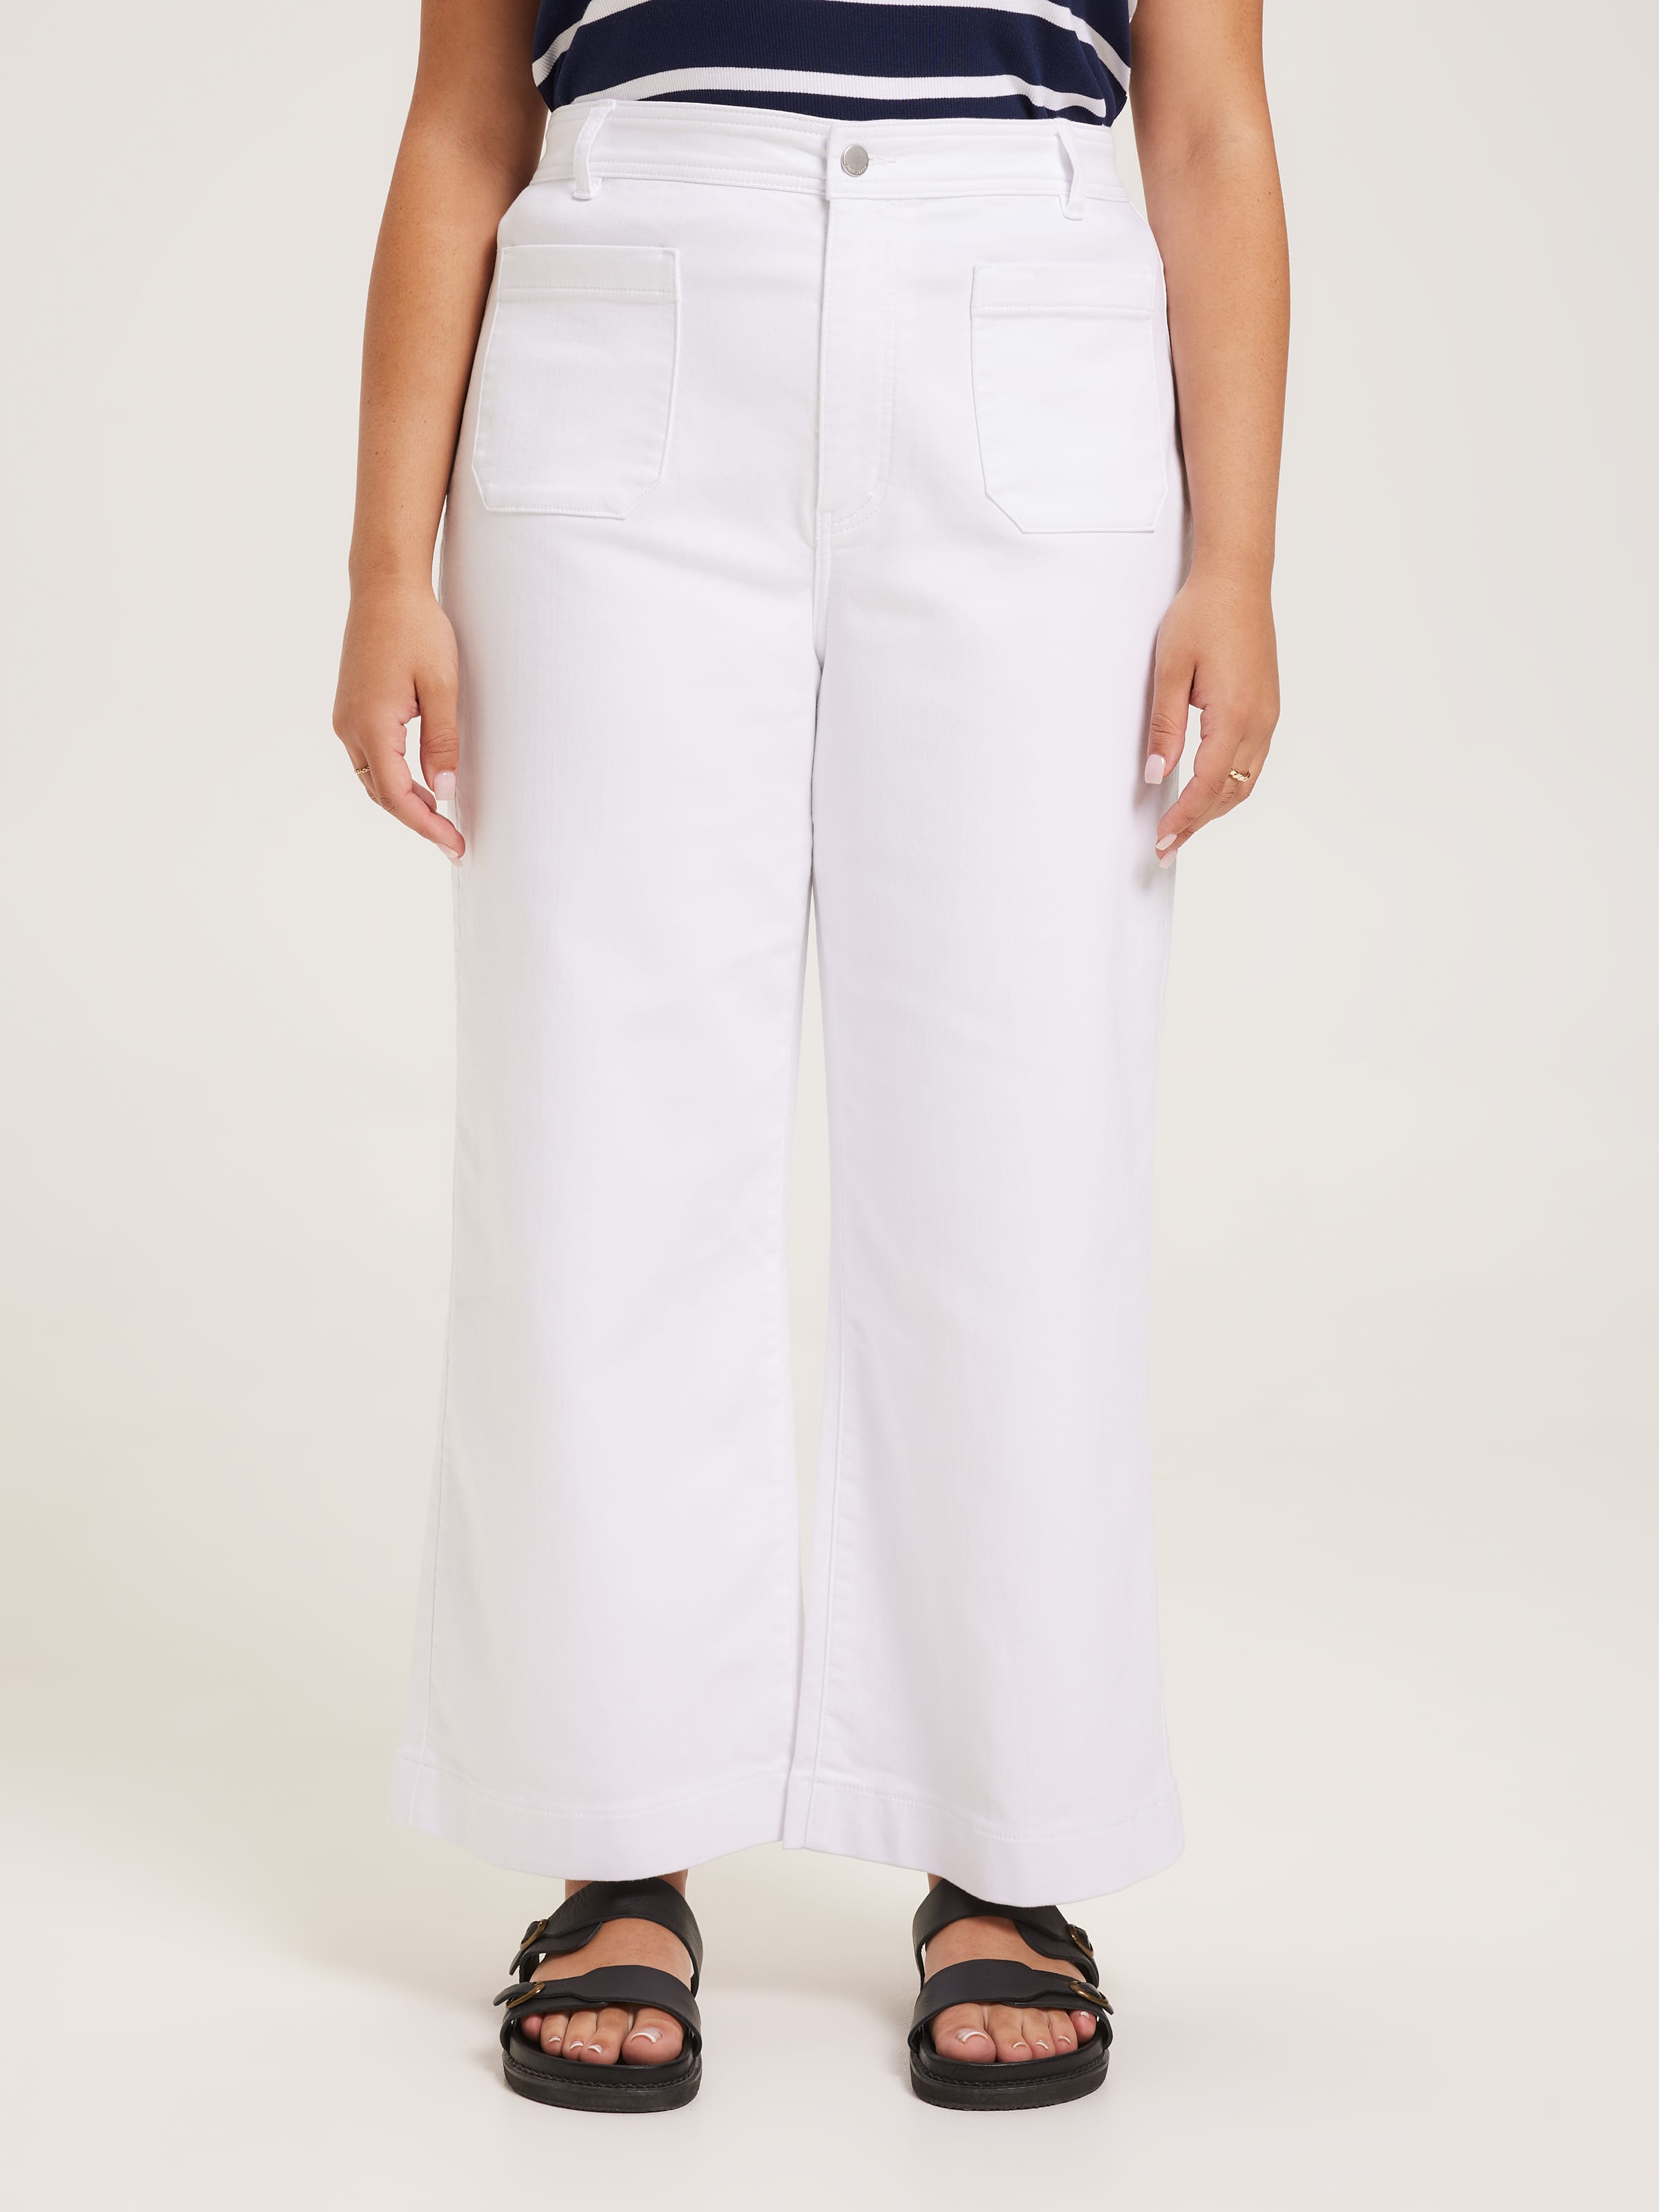 Cato Fashions | Cato Cropped Distressed White Jeans